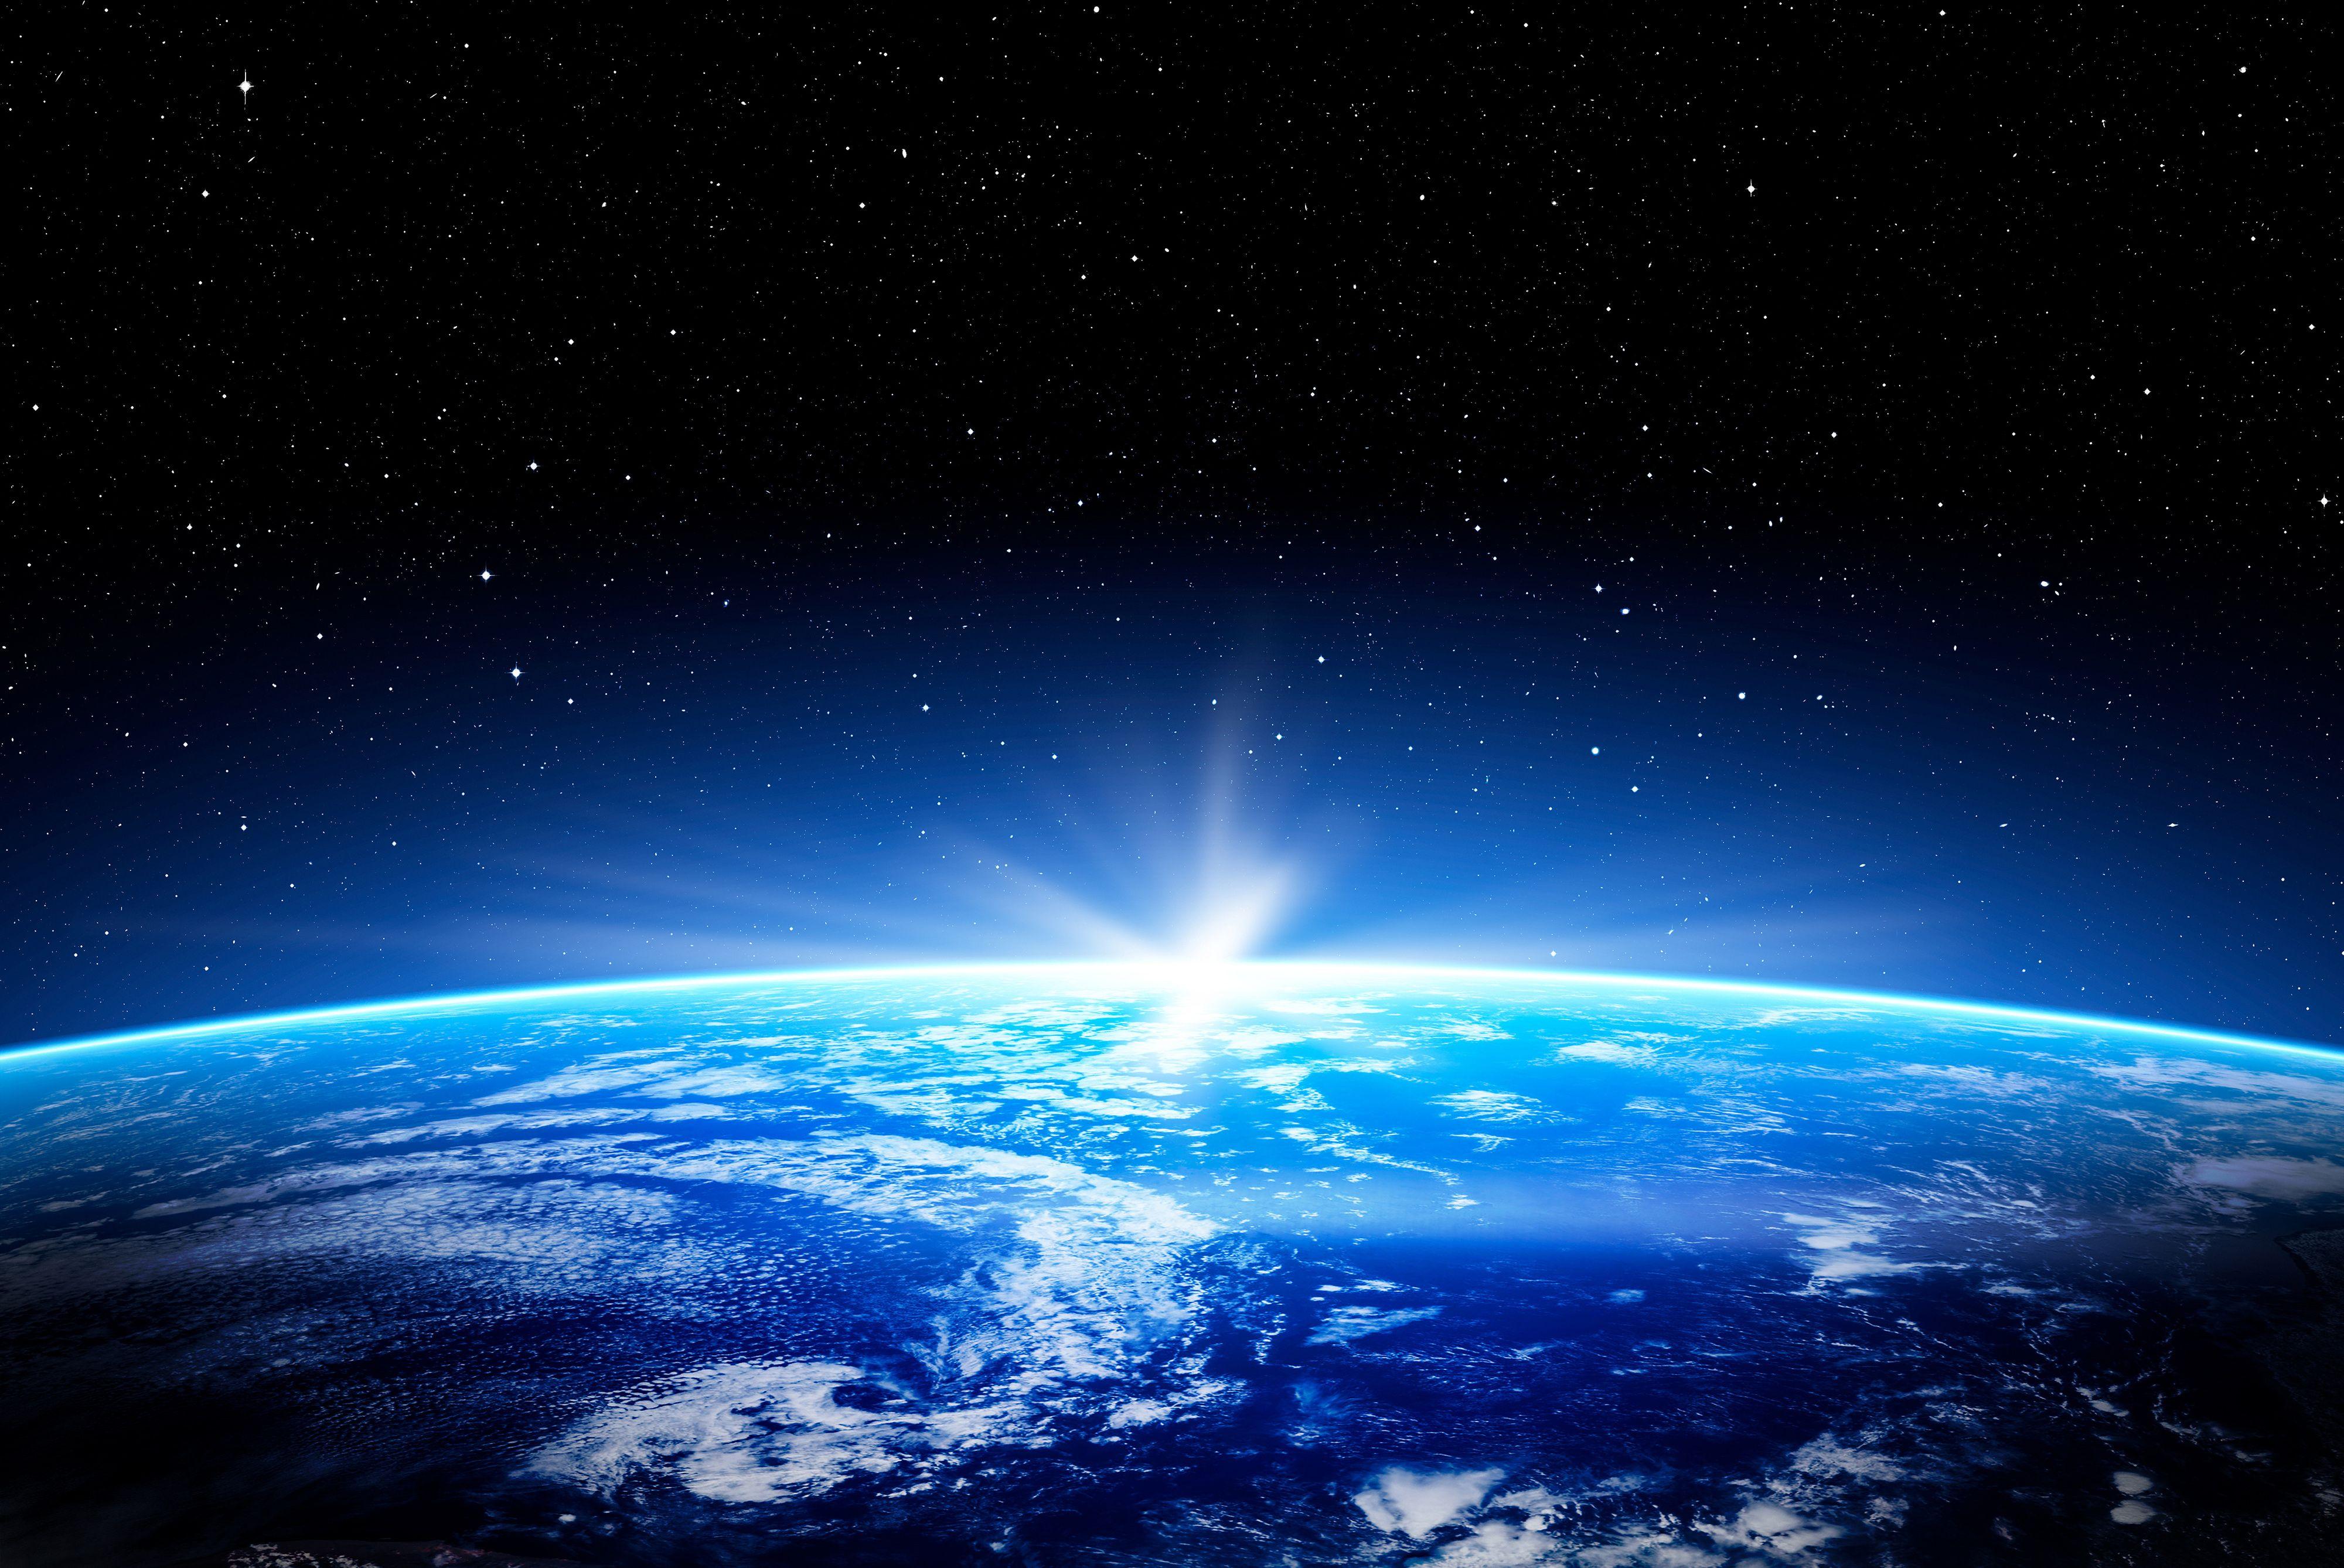 4k Earth Wallpapers Top Free 4k Earth Backgrounds Wallpaperaccess